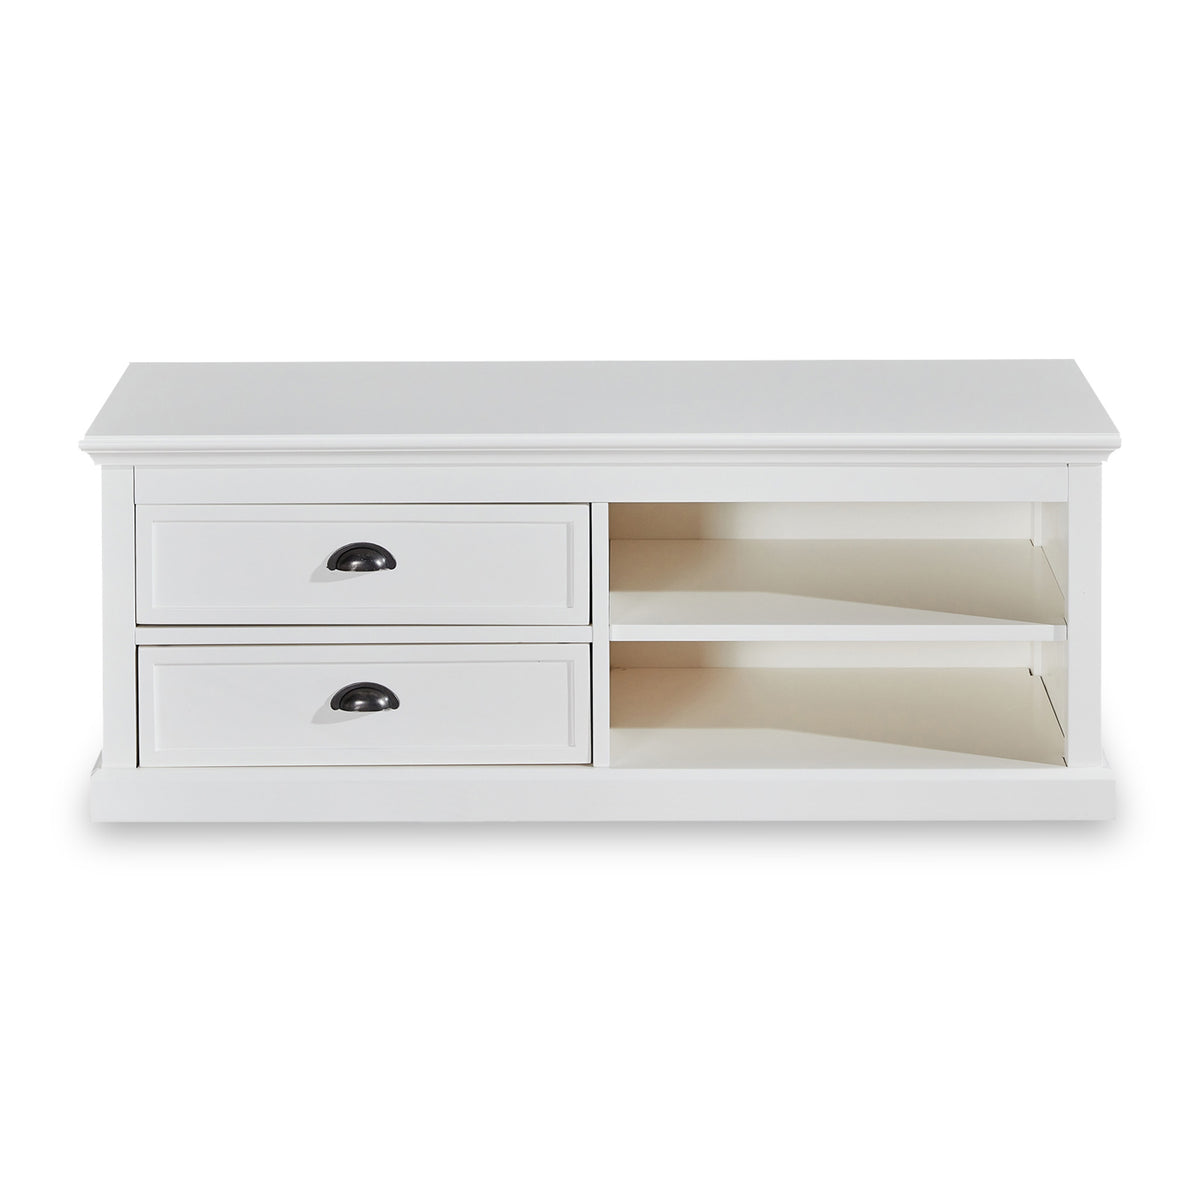 Leighton White 120cm Wide TV Cabinet with drawers